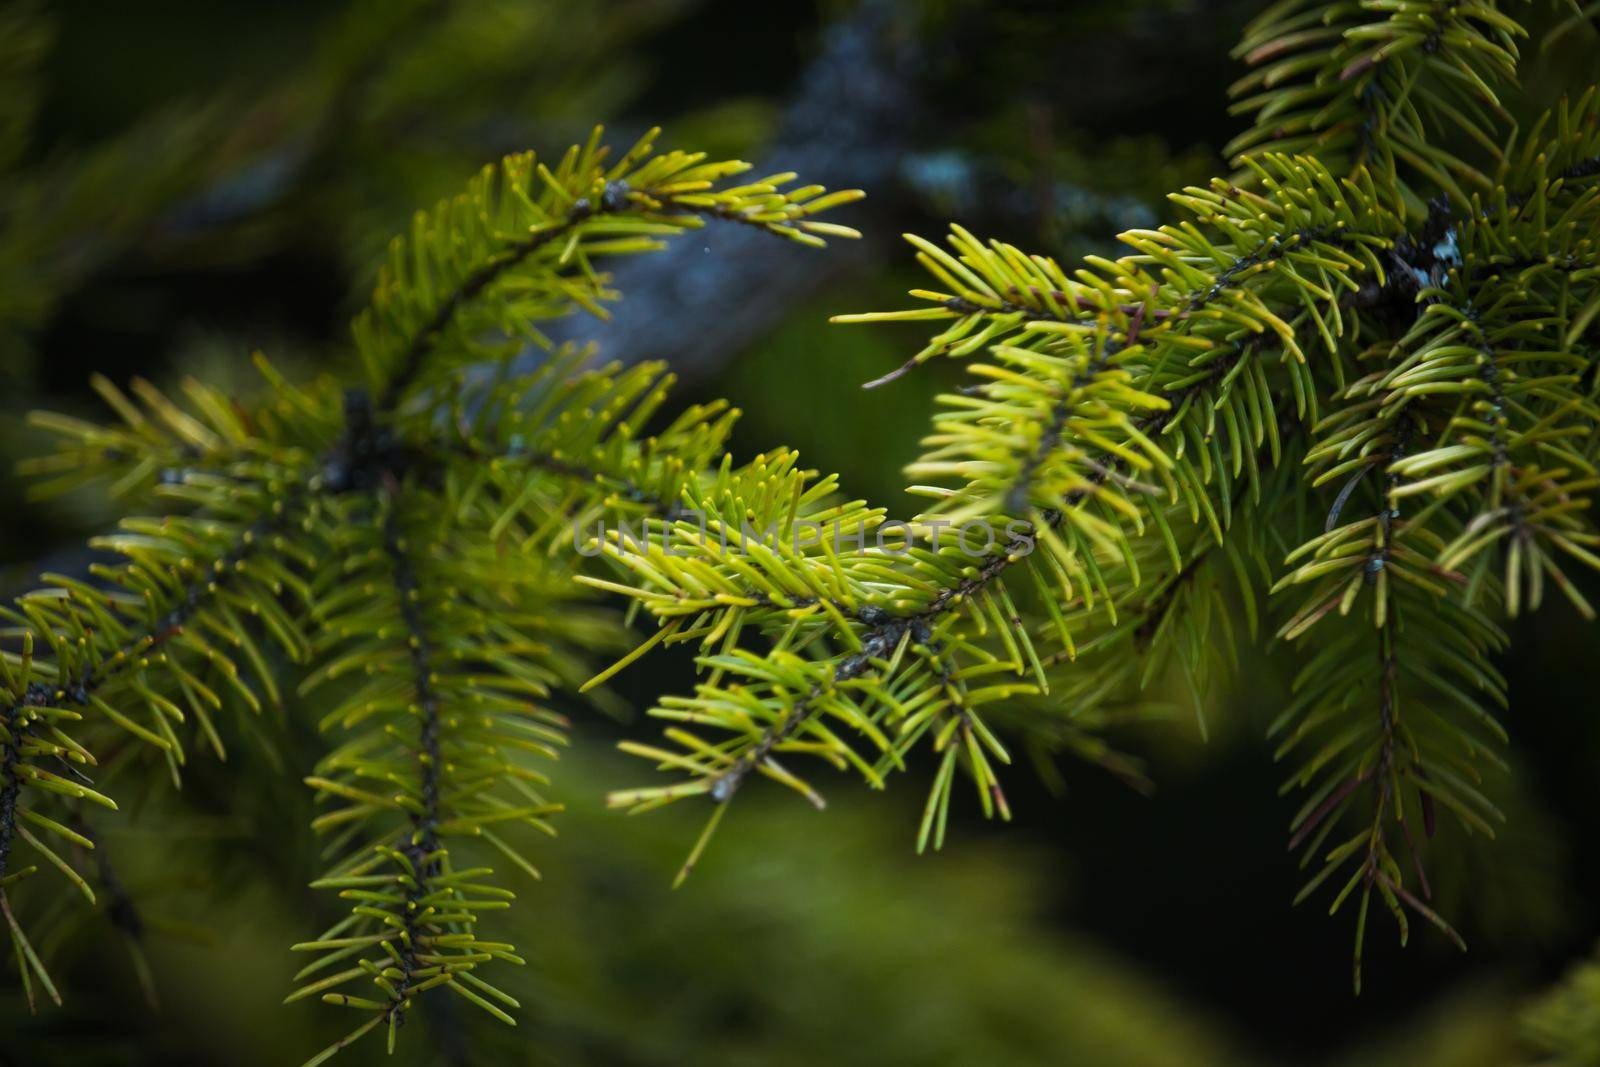 Green prickly branches of a fur-tree or pine. Fluffy fir tree branch close up. background blur by codrinn